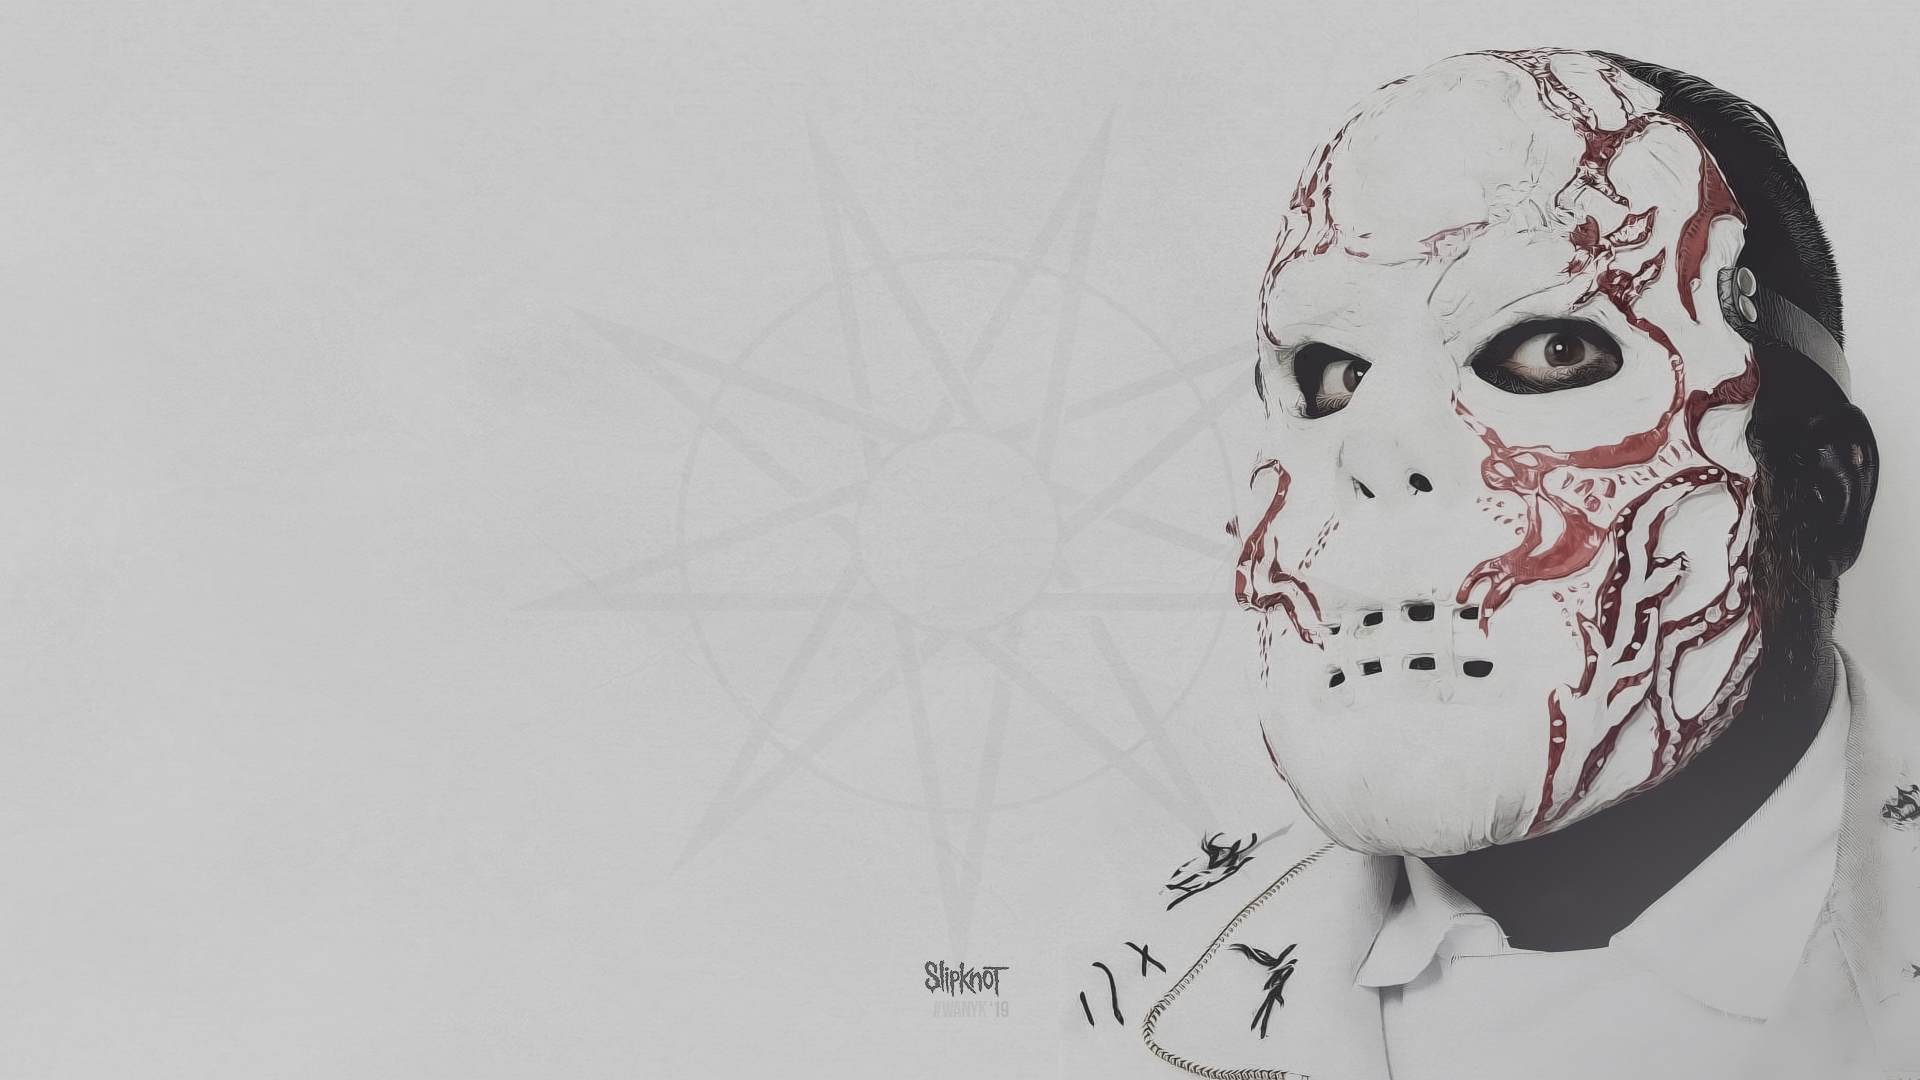 General 1920x1080 Slipknot WANYK We Are Not Your Kind 2019 (year) Alessandro Venturella music